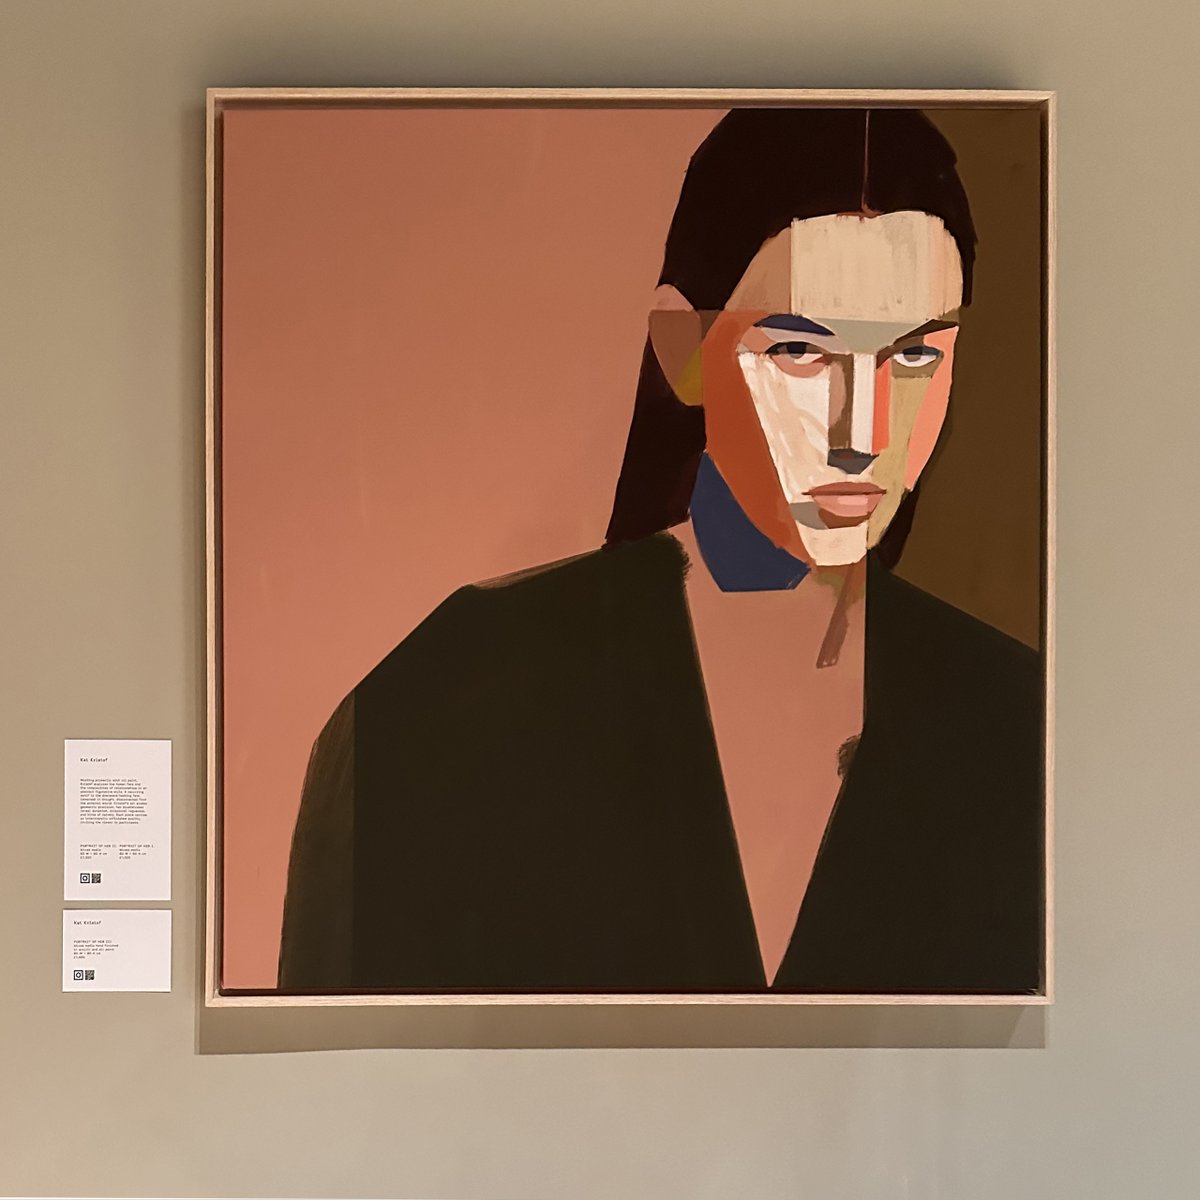 The haunting 'Portrait of Her' by Kat Kristof at the Conran Store in Sloane Square 😎 Not only an exciting new artist but also a qualified architect! #conran #conranshop #sloanesquare #London #kingsroad #artist #painter #portraitofher #contemporaryart #conranstore #KatKristof